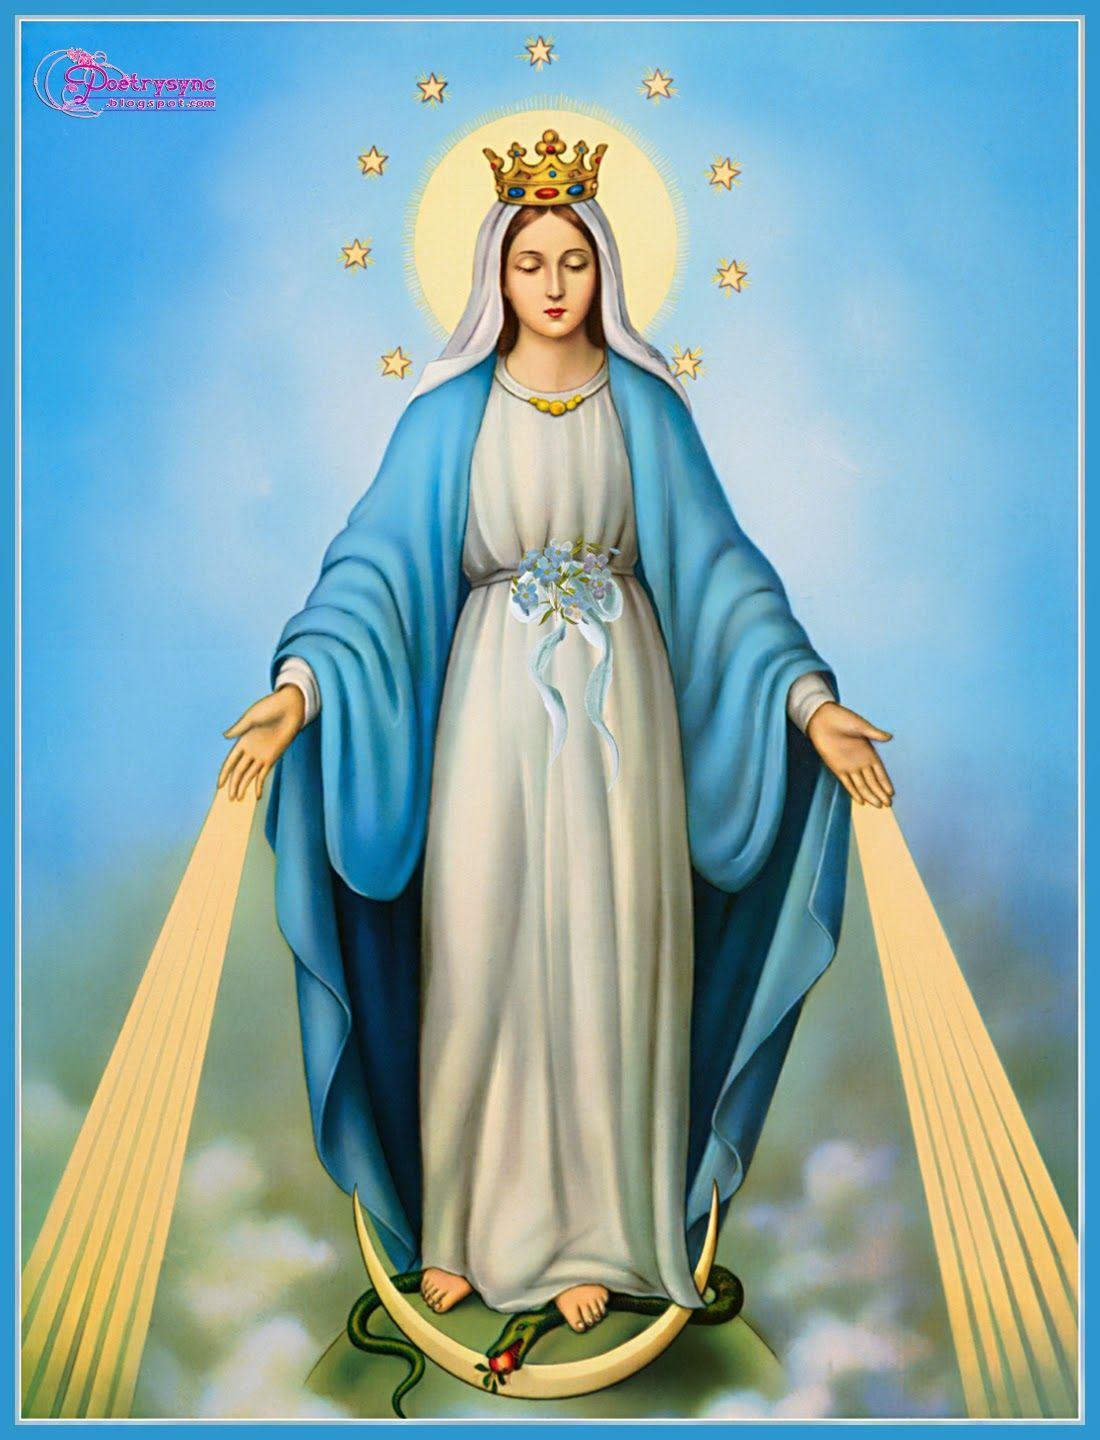 Merry Chrismast and Happy New Year: Feast of the Immaculate